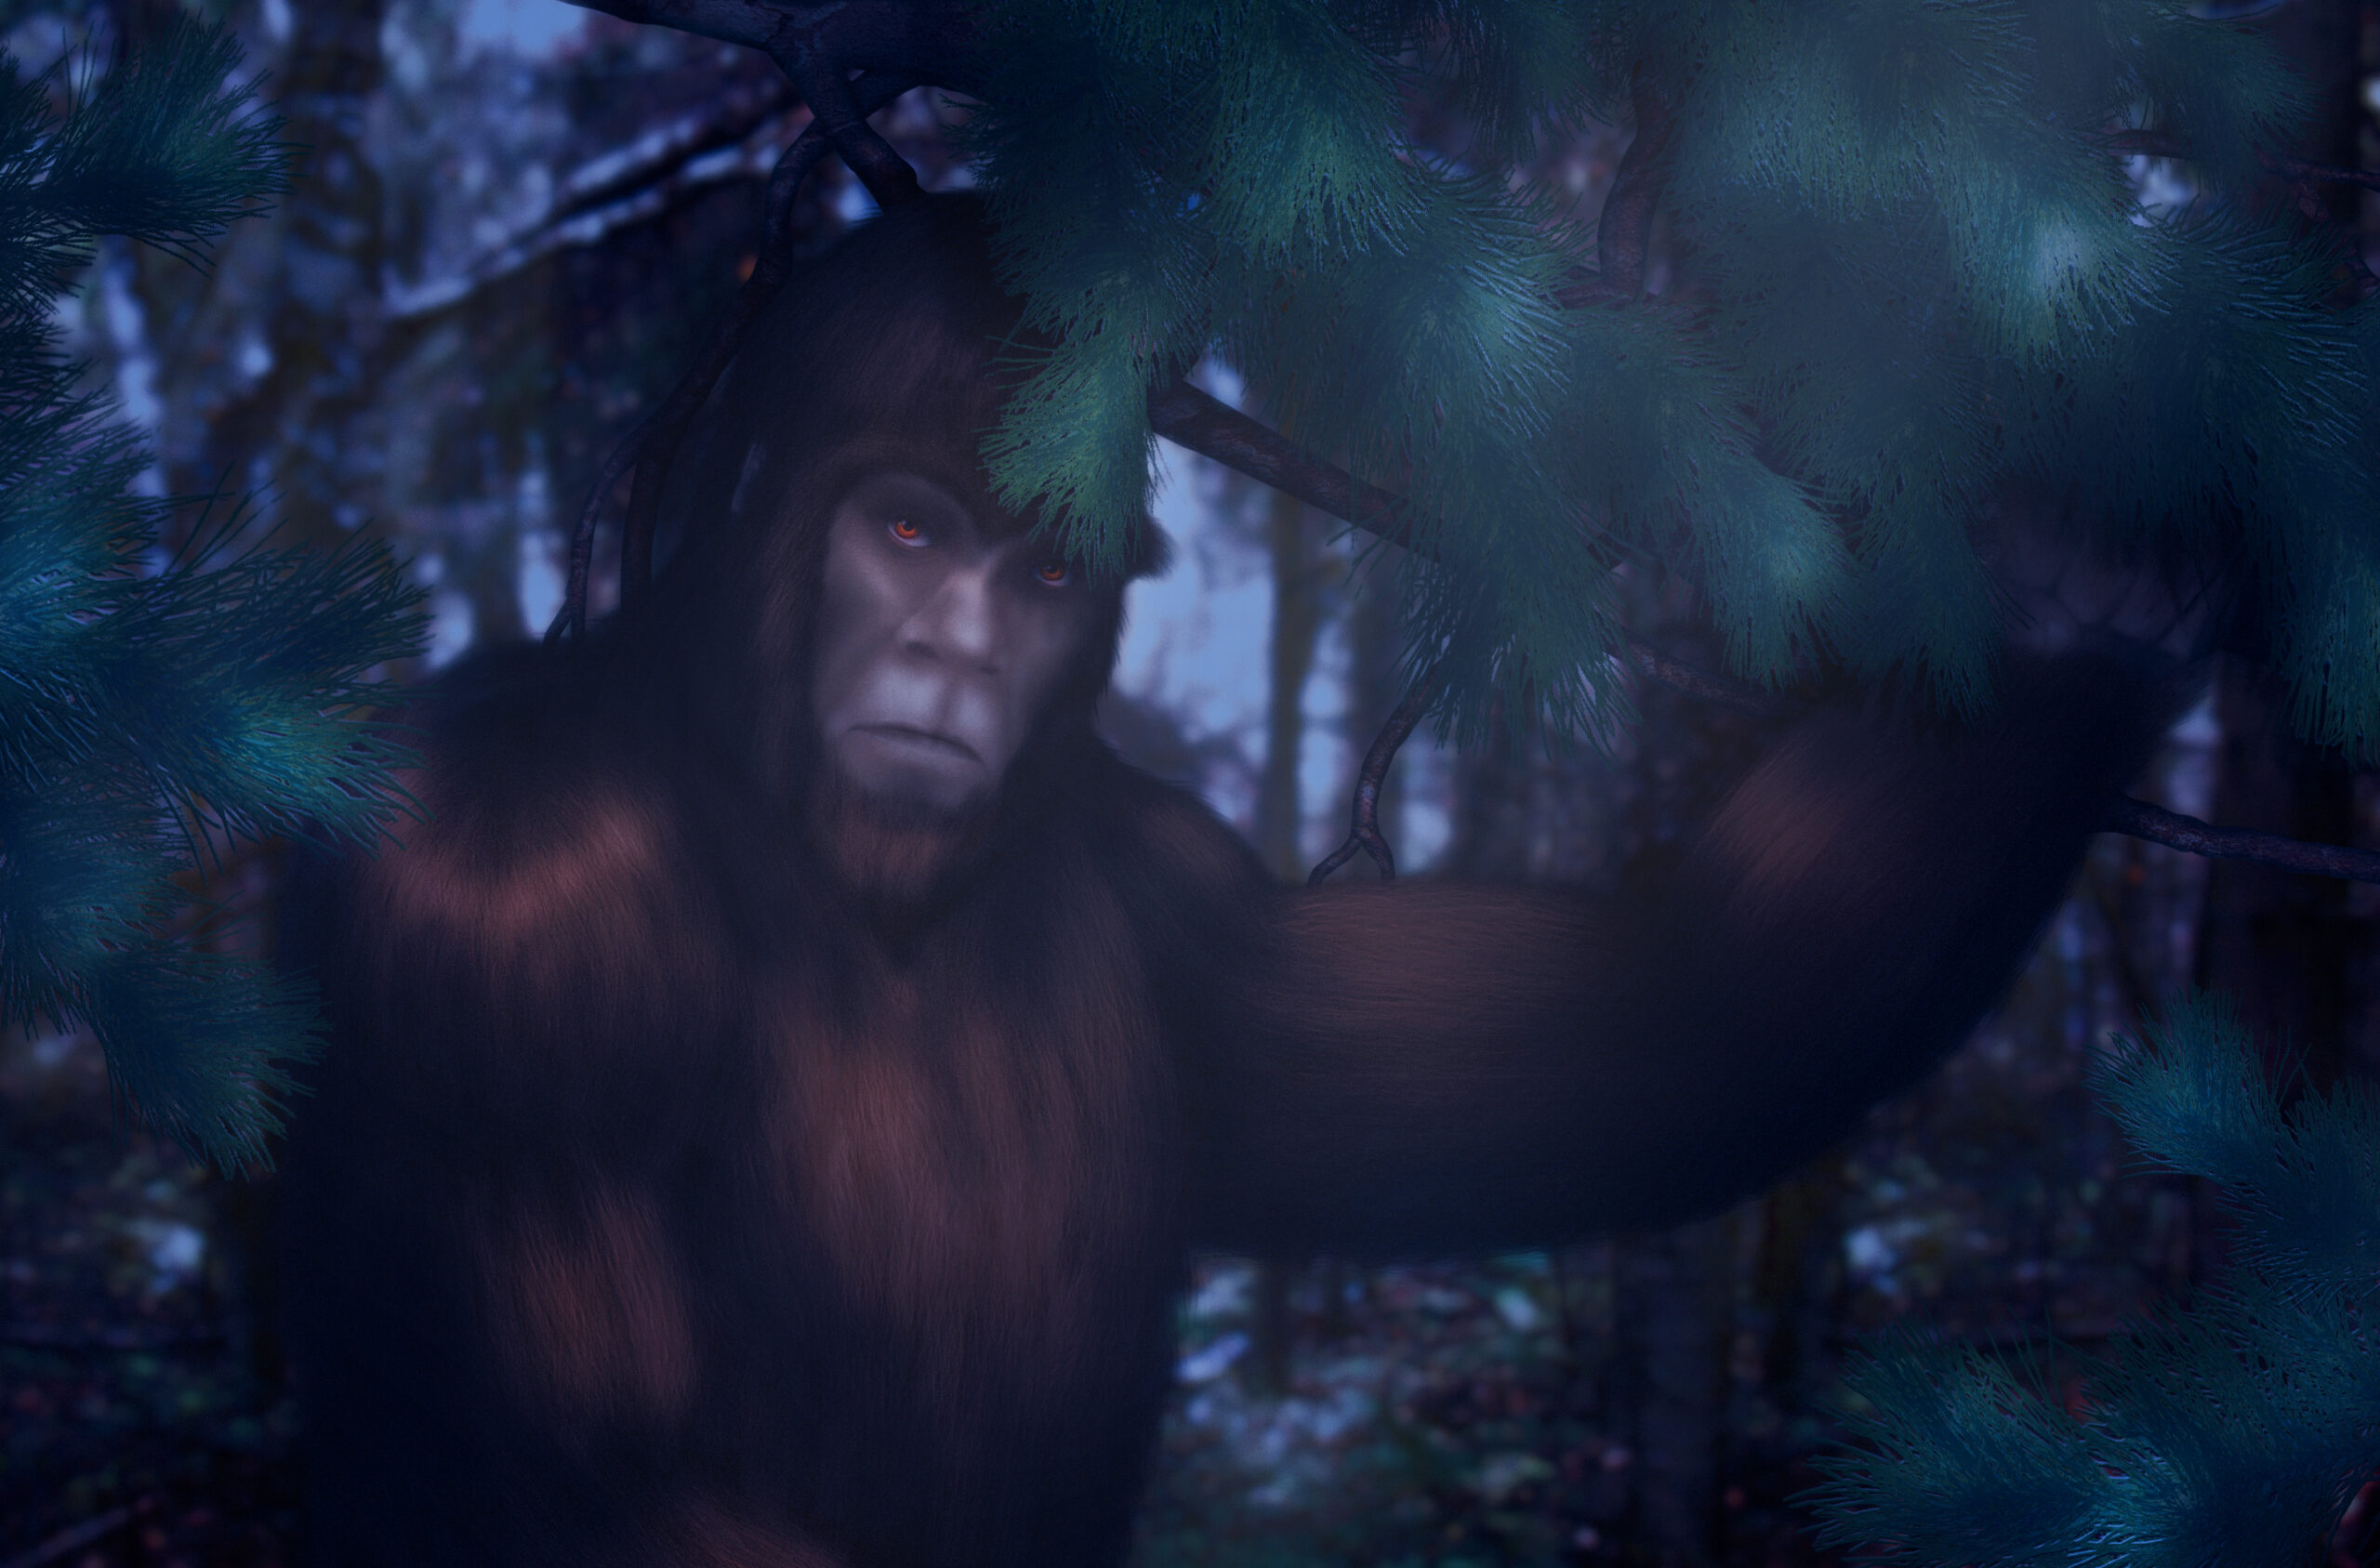 Bigfoot hiding behind a pine branch in the forest on a moonlit night.